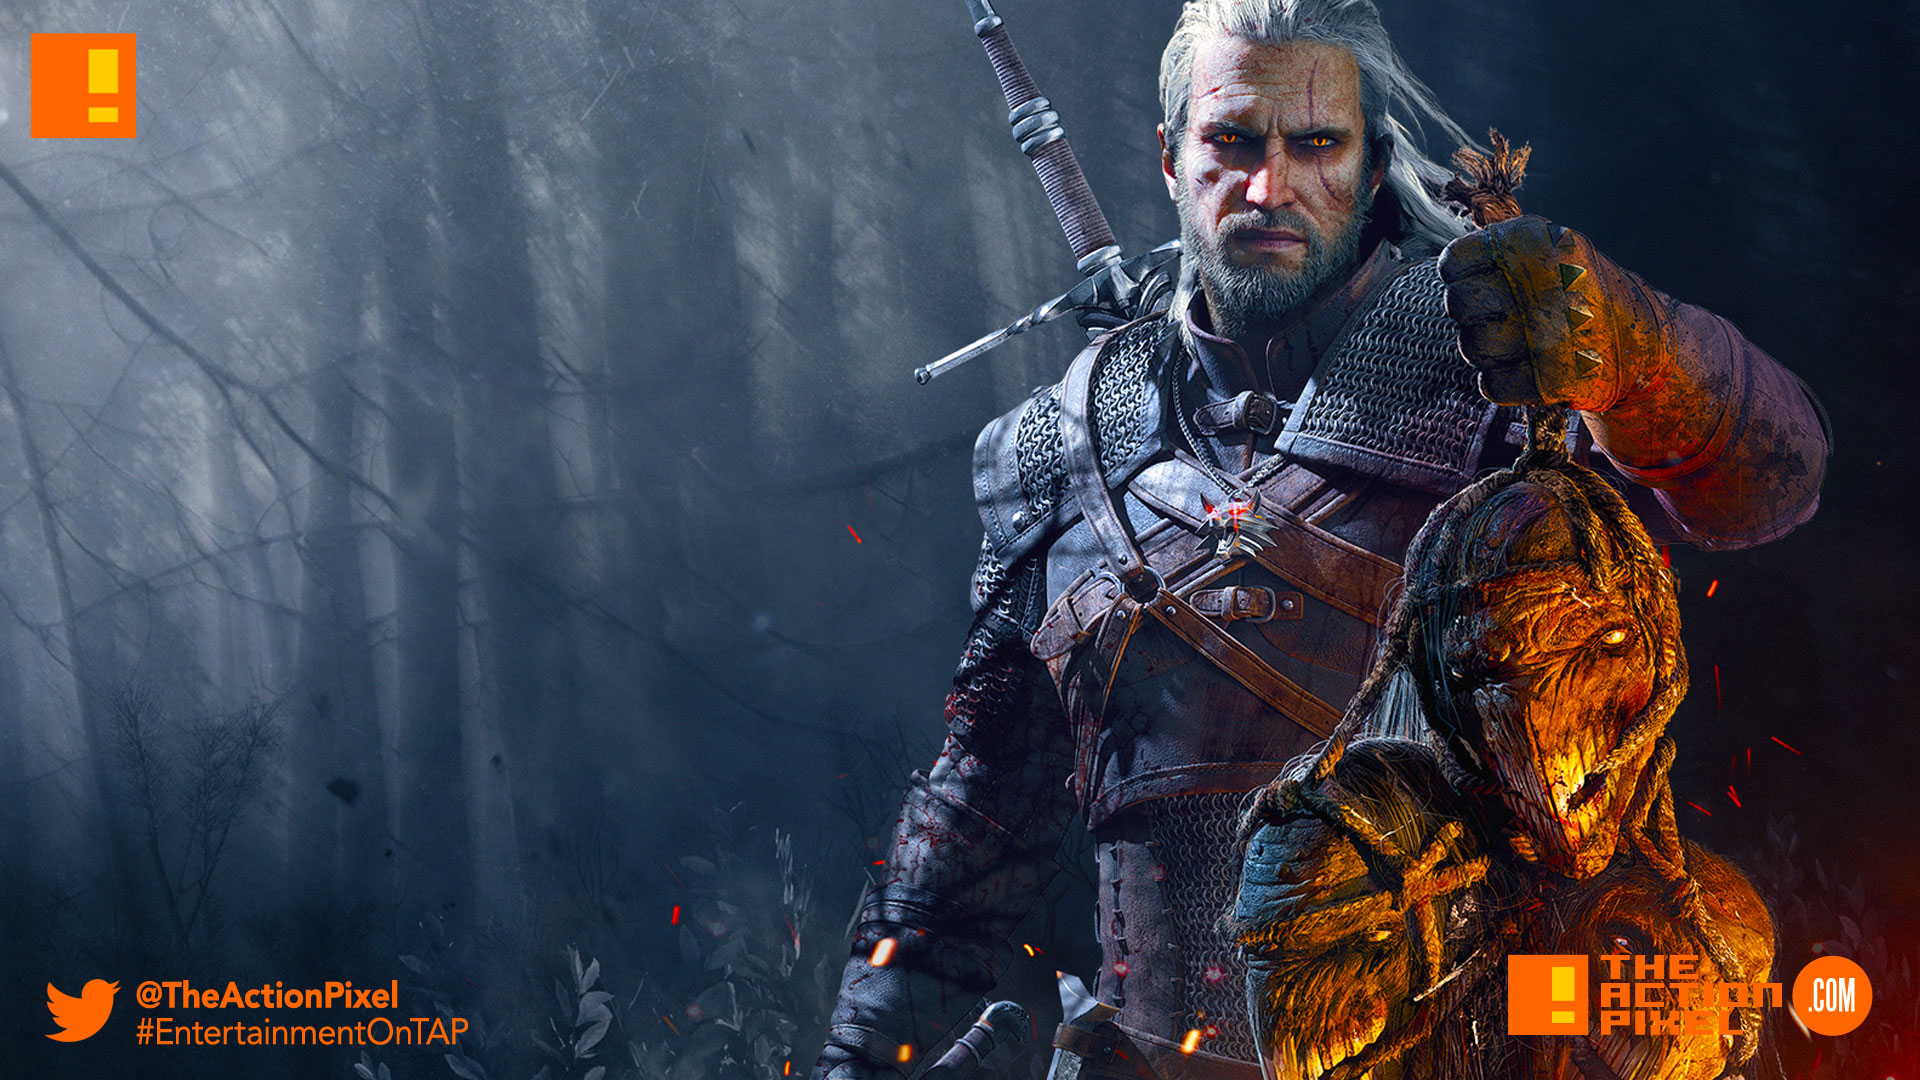 the witcher 3: wild hunt, Geralt, netflix, entertainment on tap, the action pixel, @theactionpixel, the witcher,